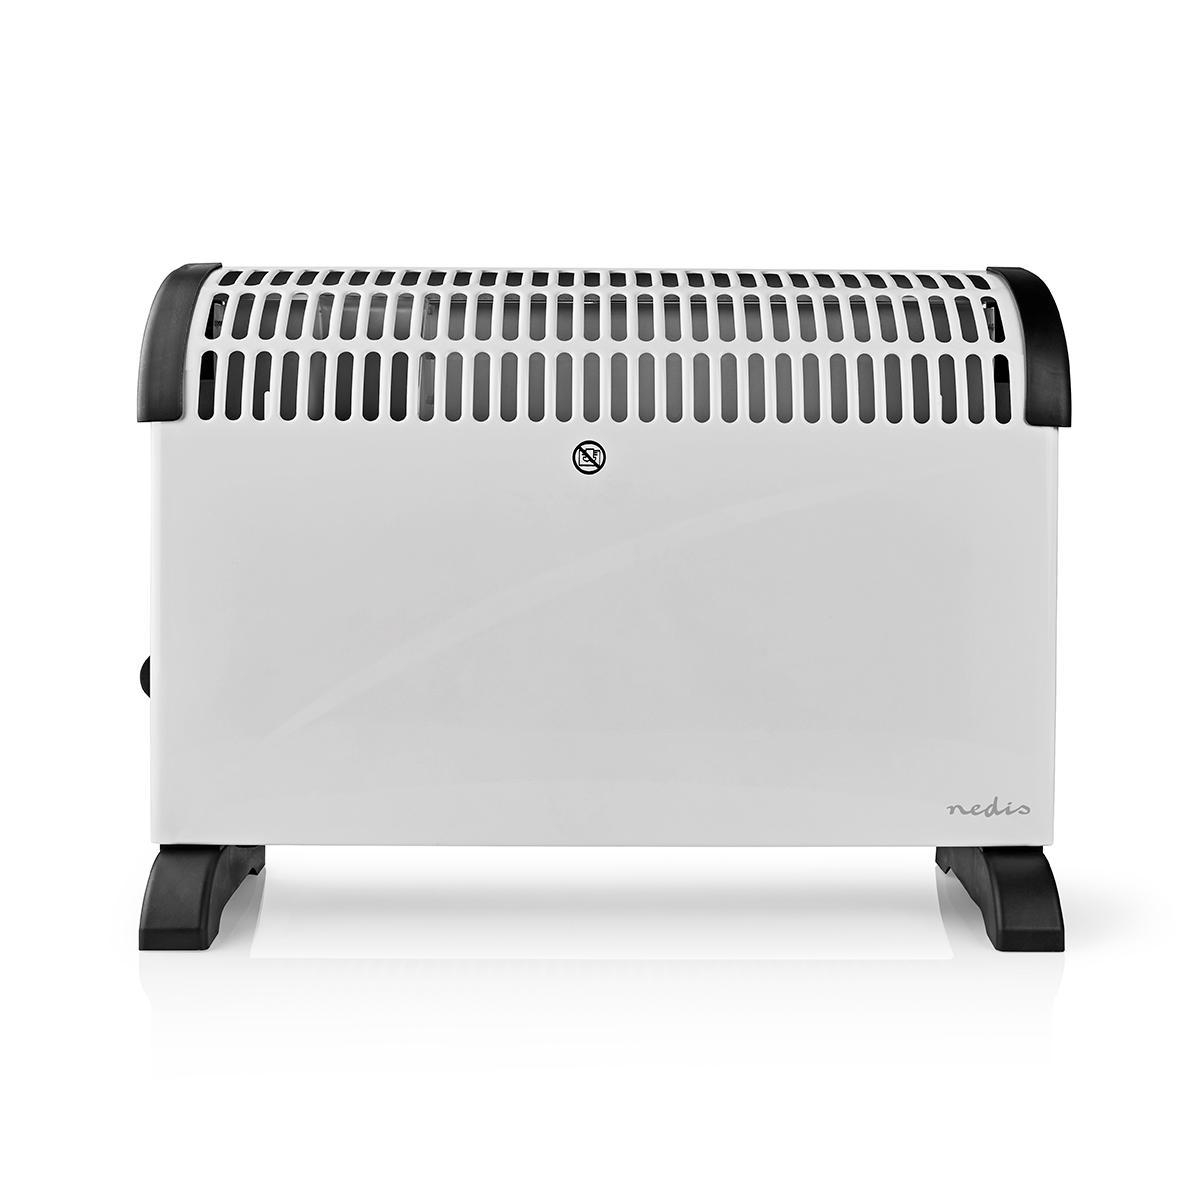 Turbo 24hr Timer & 3 Heat Settings Lettuce Eat ® 2000W Portable Electric Convector Heater With Thermostat 